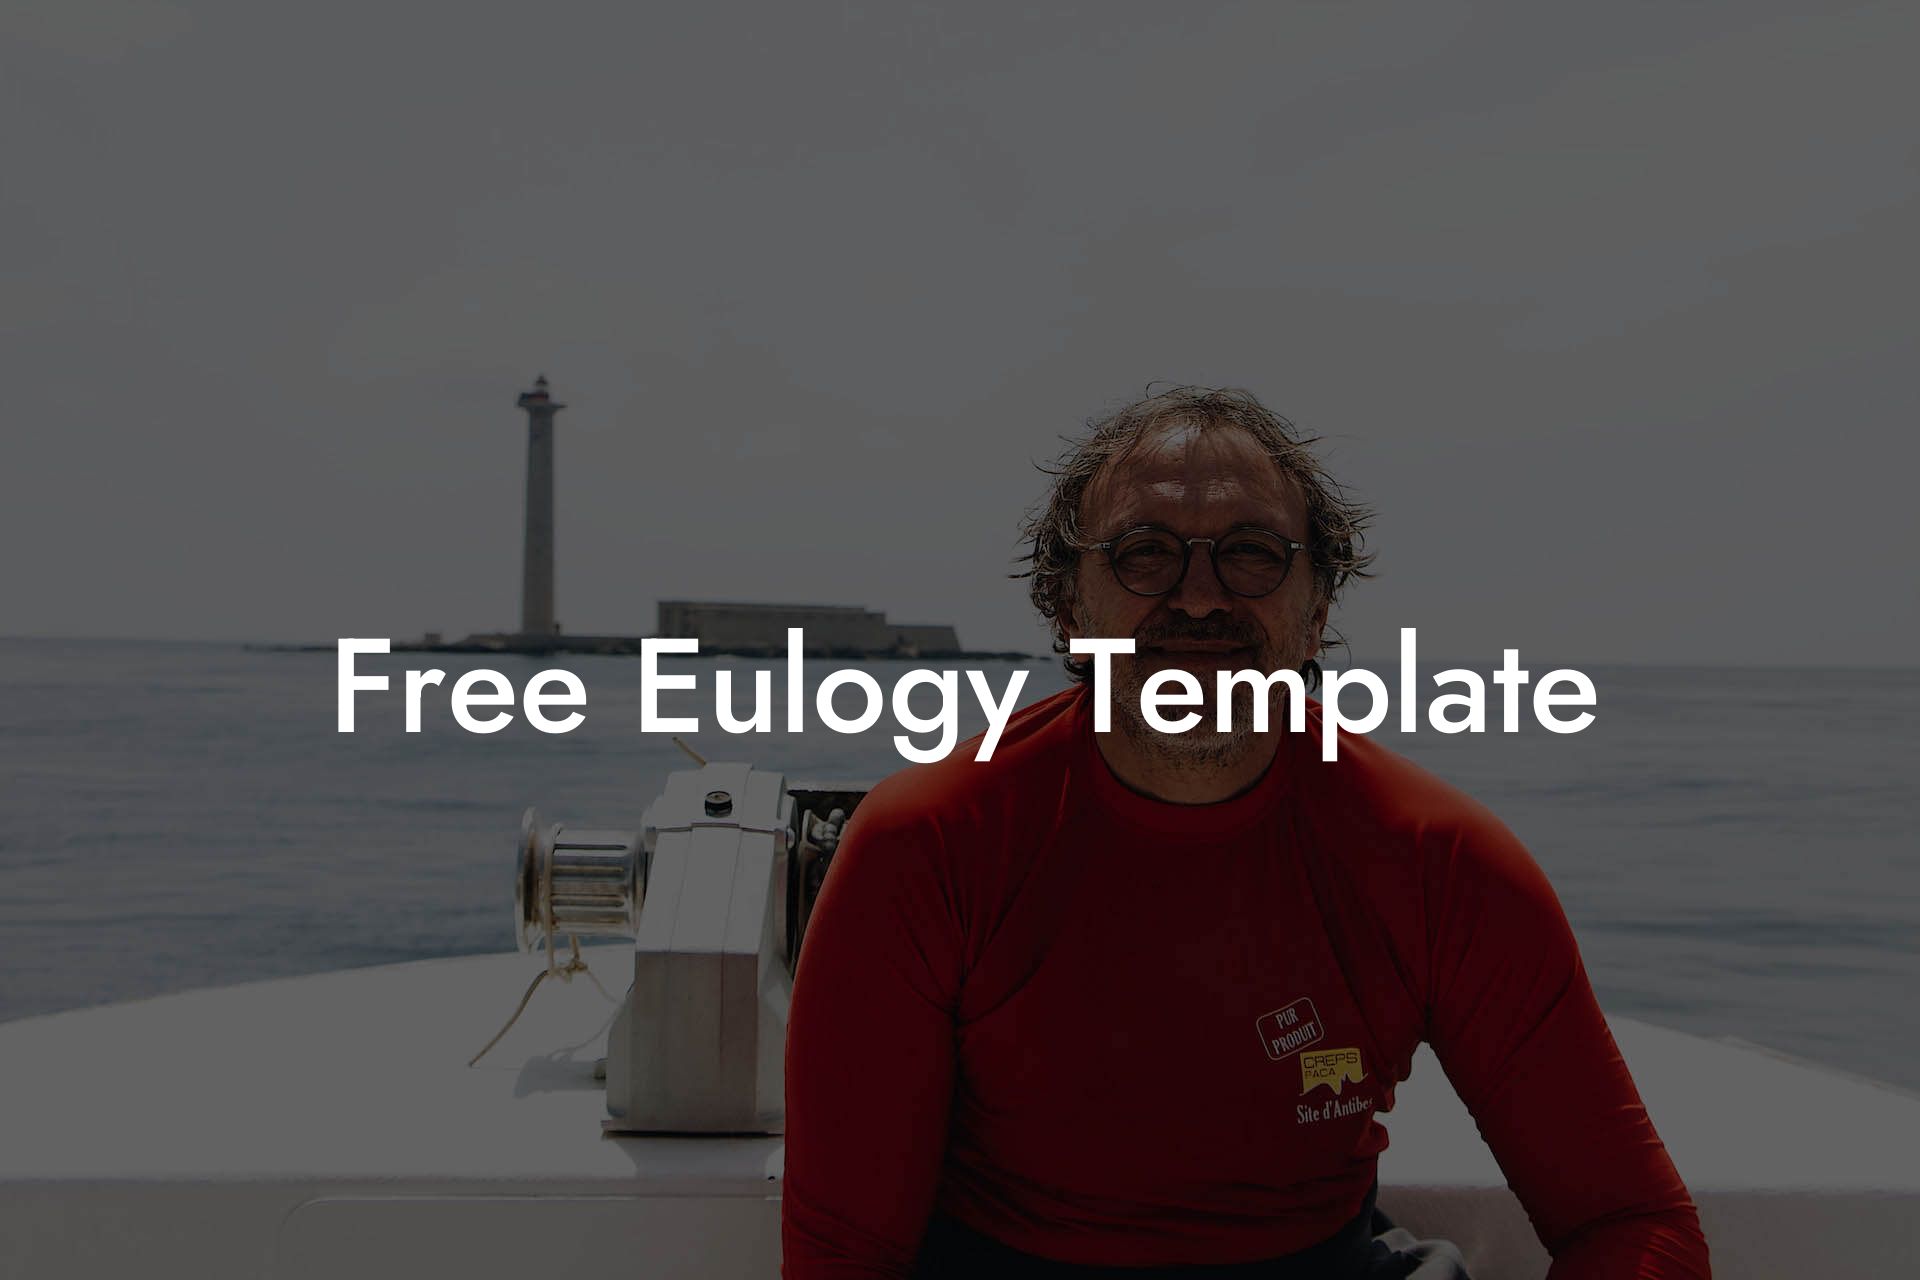 Free Eulogy Template